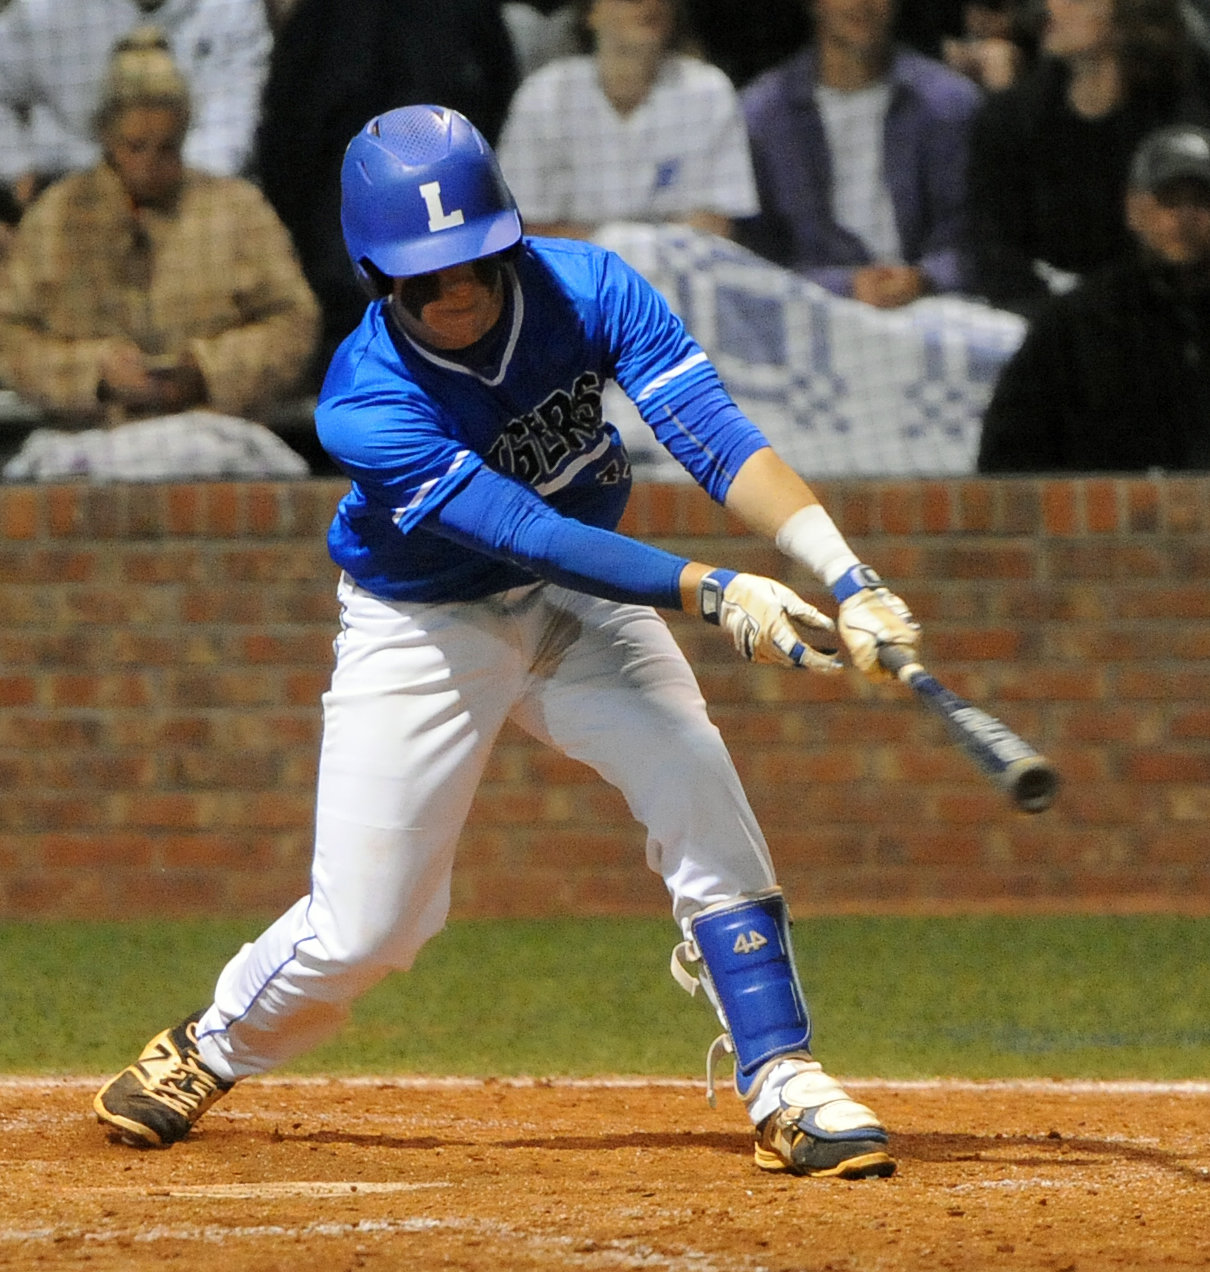 Trey Warner makes contact on a pitch and reaches base.